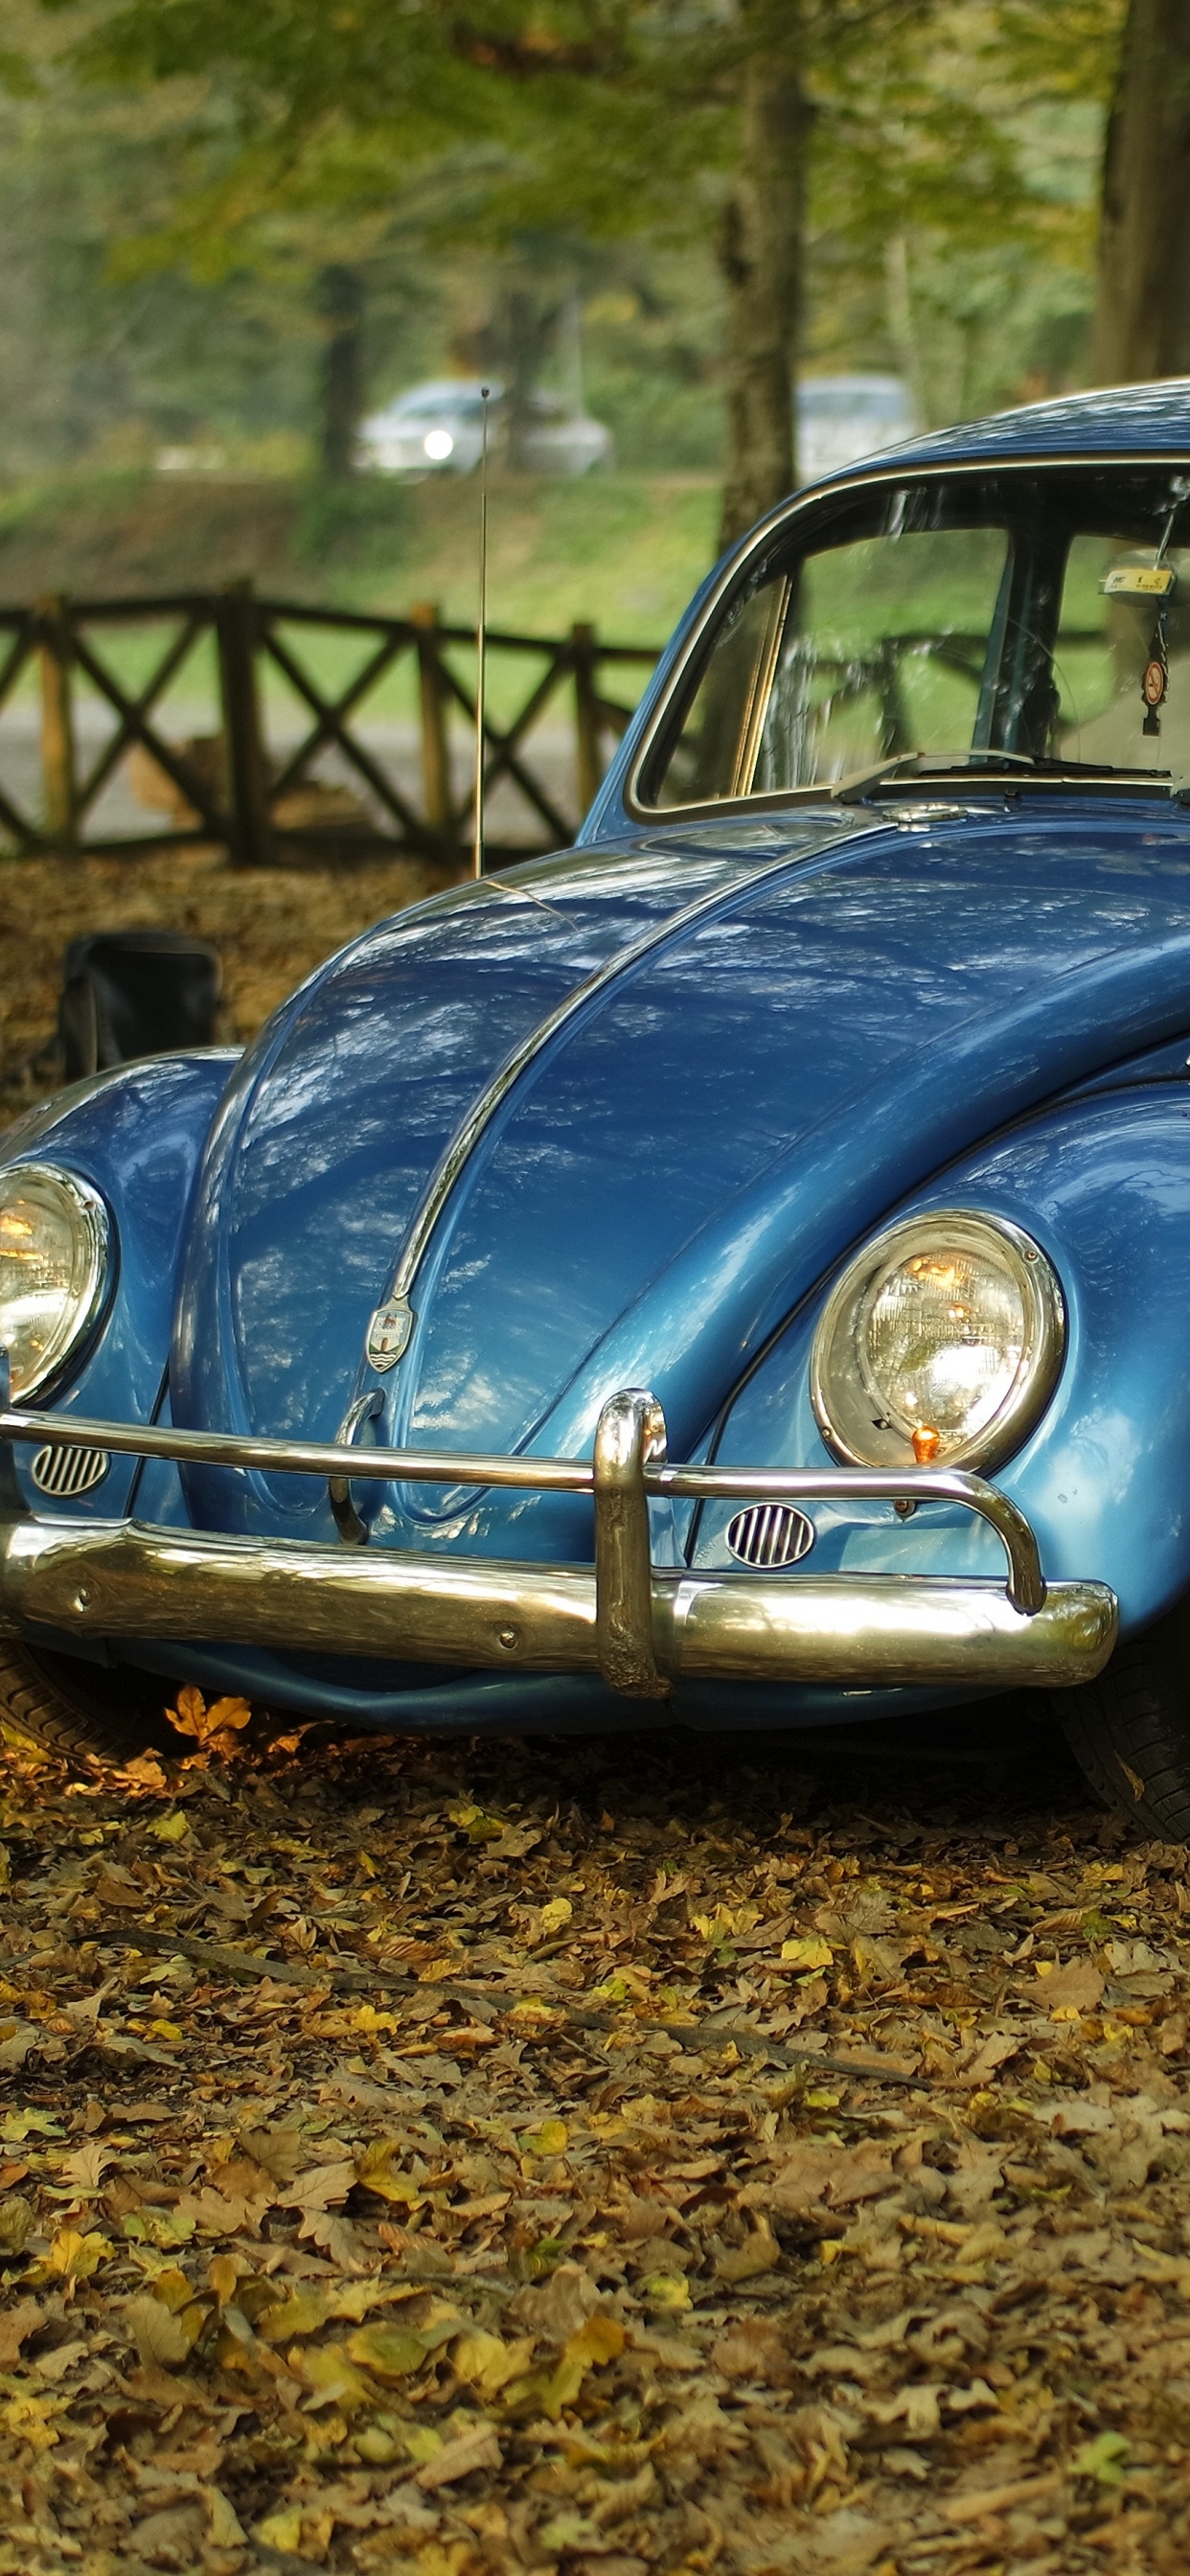 Blue Volkswagen Beetle on Brown Dried Leaves During Daytime. Wallpaper in 1242x2688 Resolution